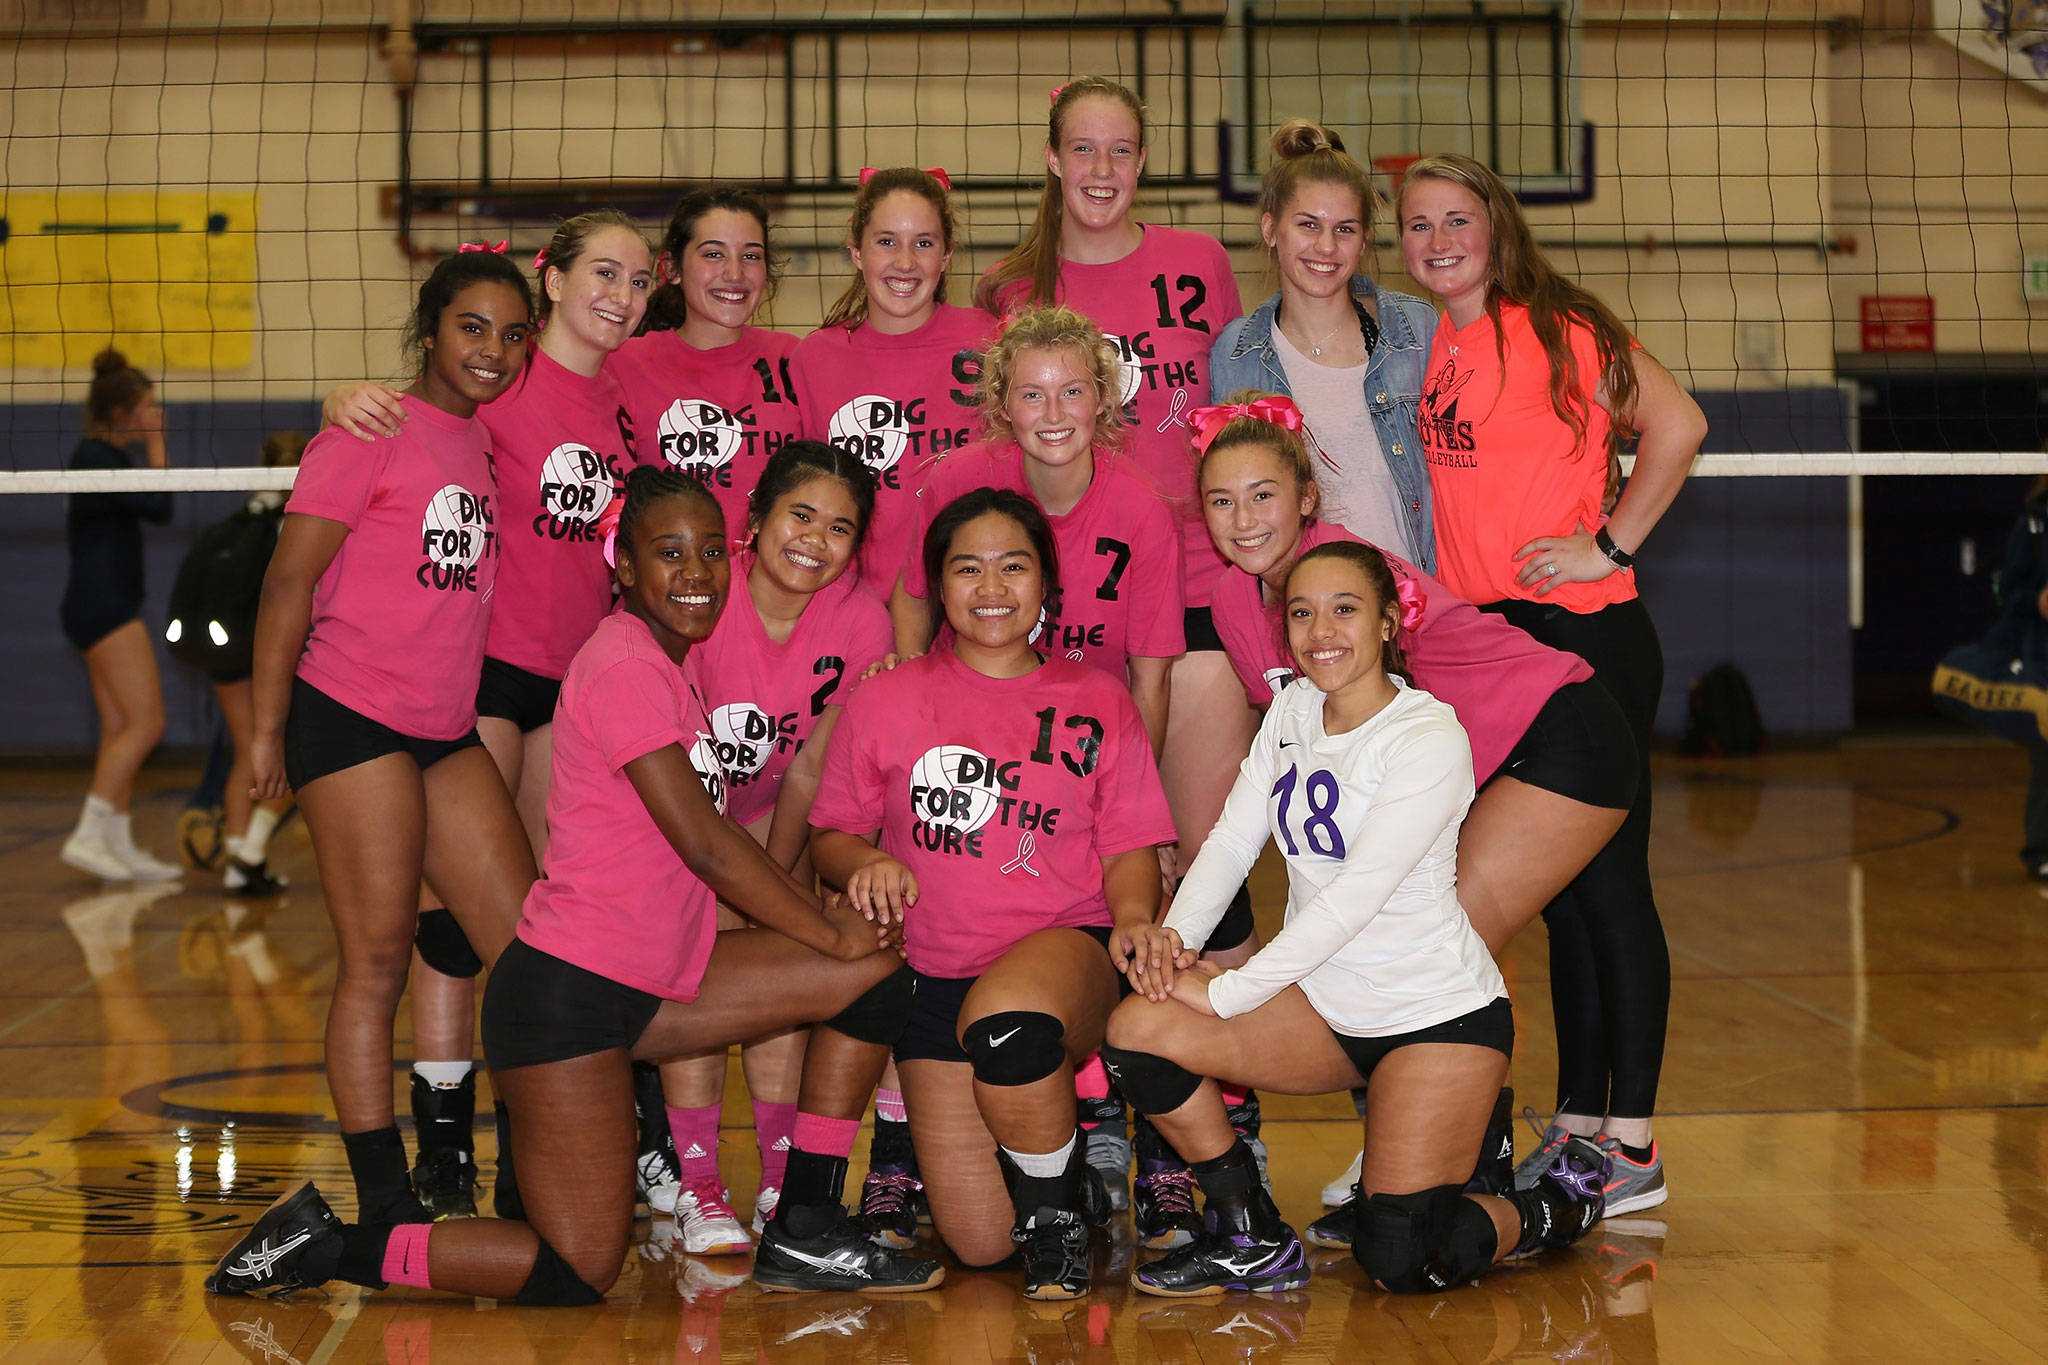 The Wildcats sport their cancer awareness Dig for the Cure uniforms for the Arlington match.(Photo by John Fisken)